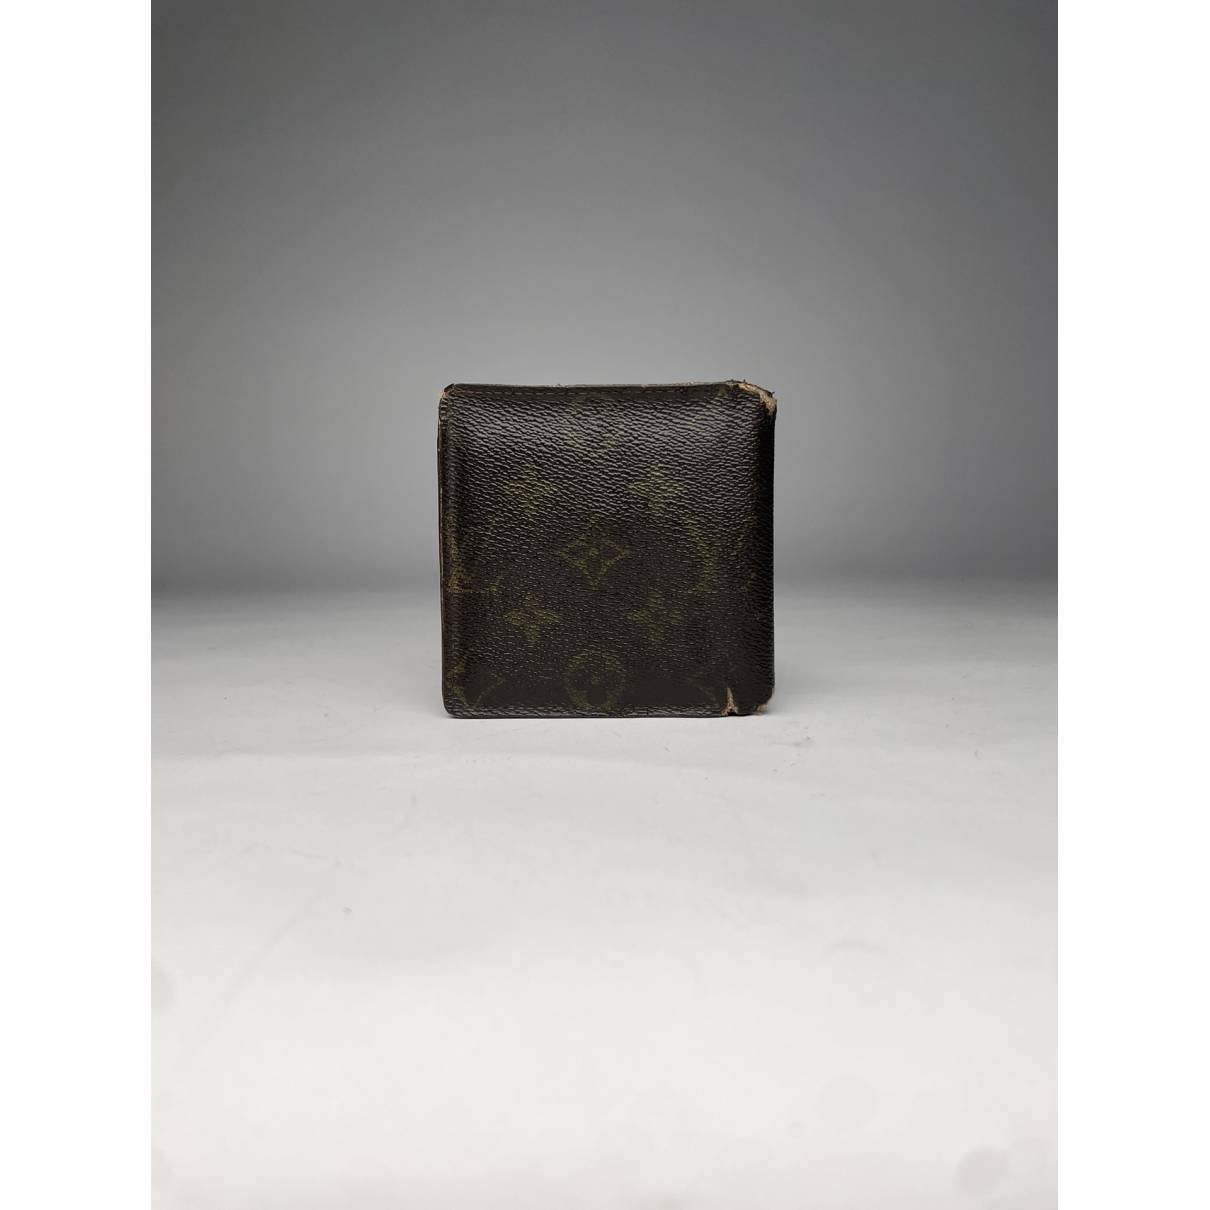 Marco leather small bag Louis Vuitton Brown in Leather - 31792209